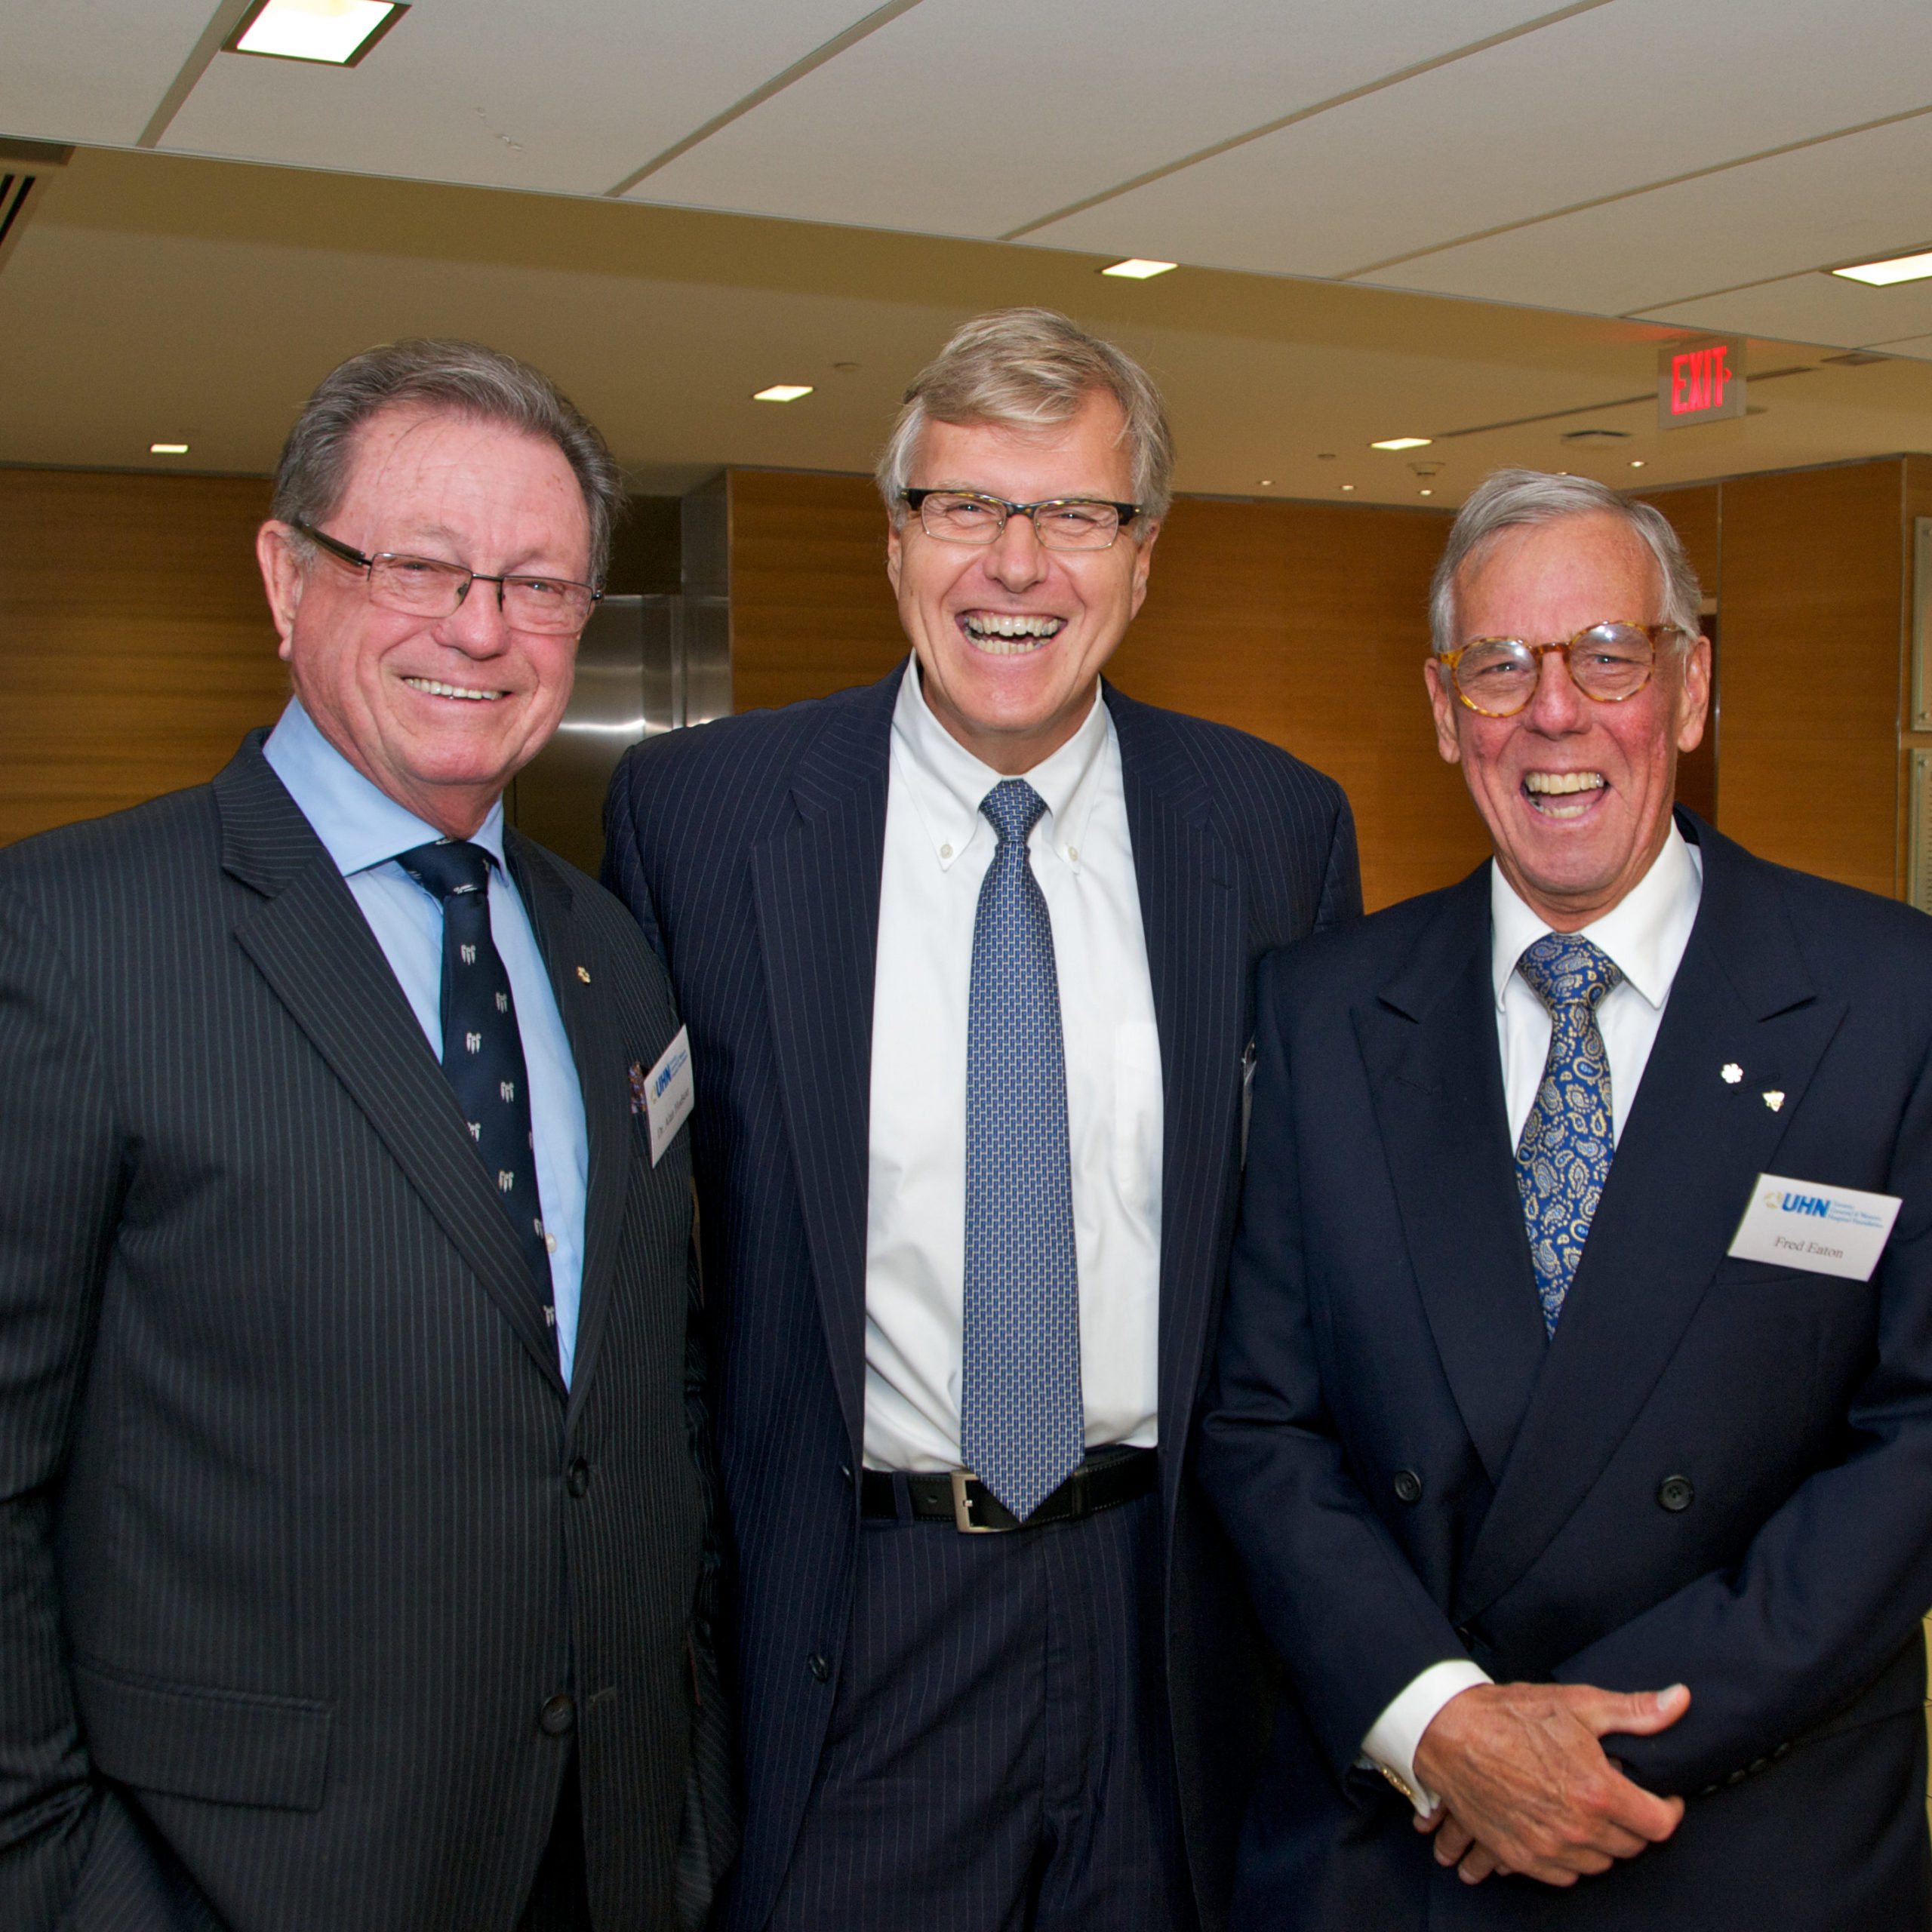 L to R: Former UHN President and CEOs Drs. Alan Hudson and Bob Bell with Fred Eaton at the dedication of the Munk Building at Toronto General Hospital in 2013.